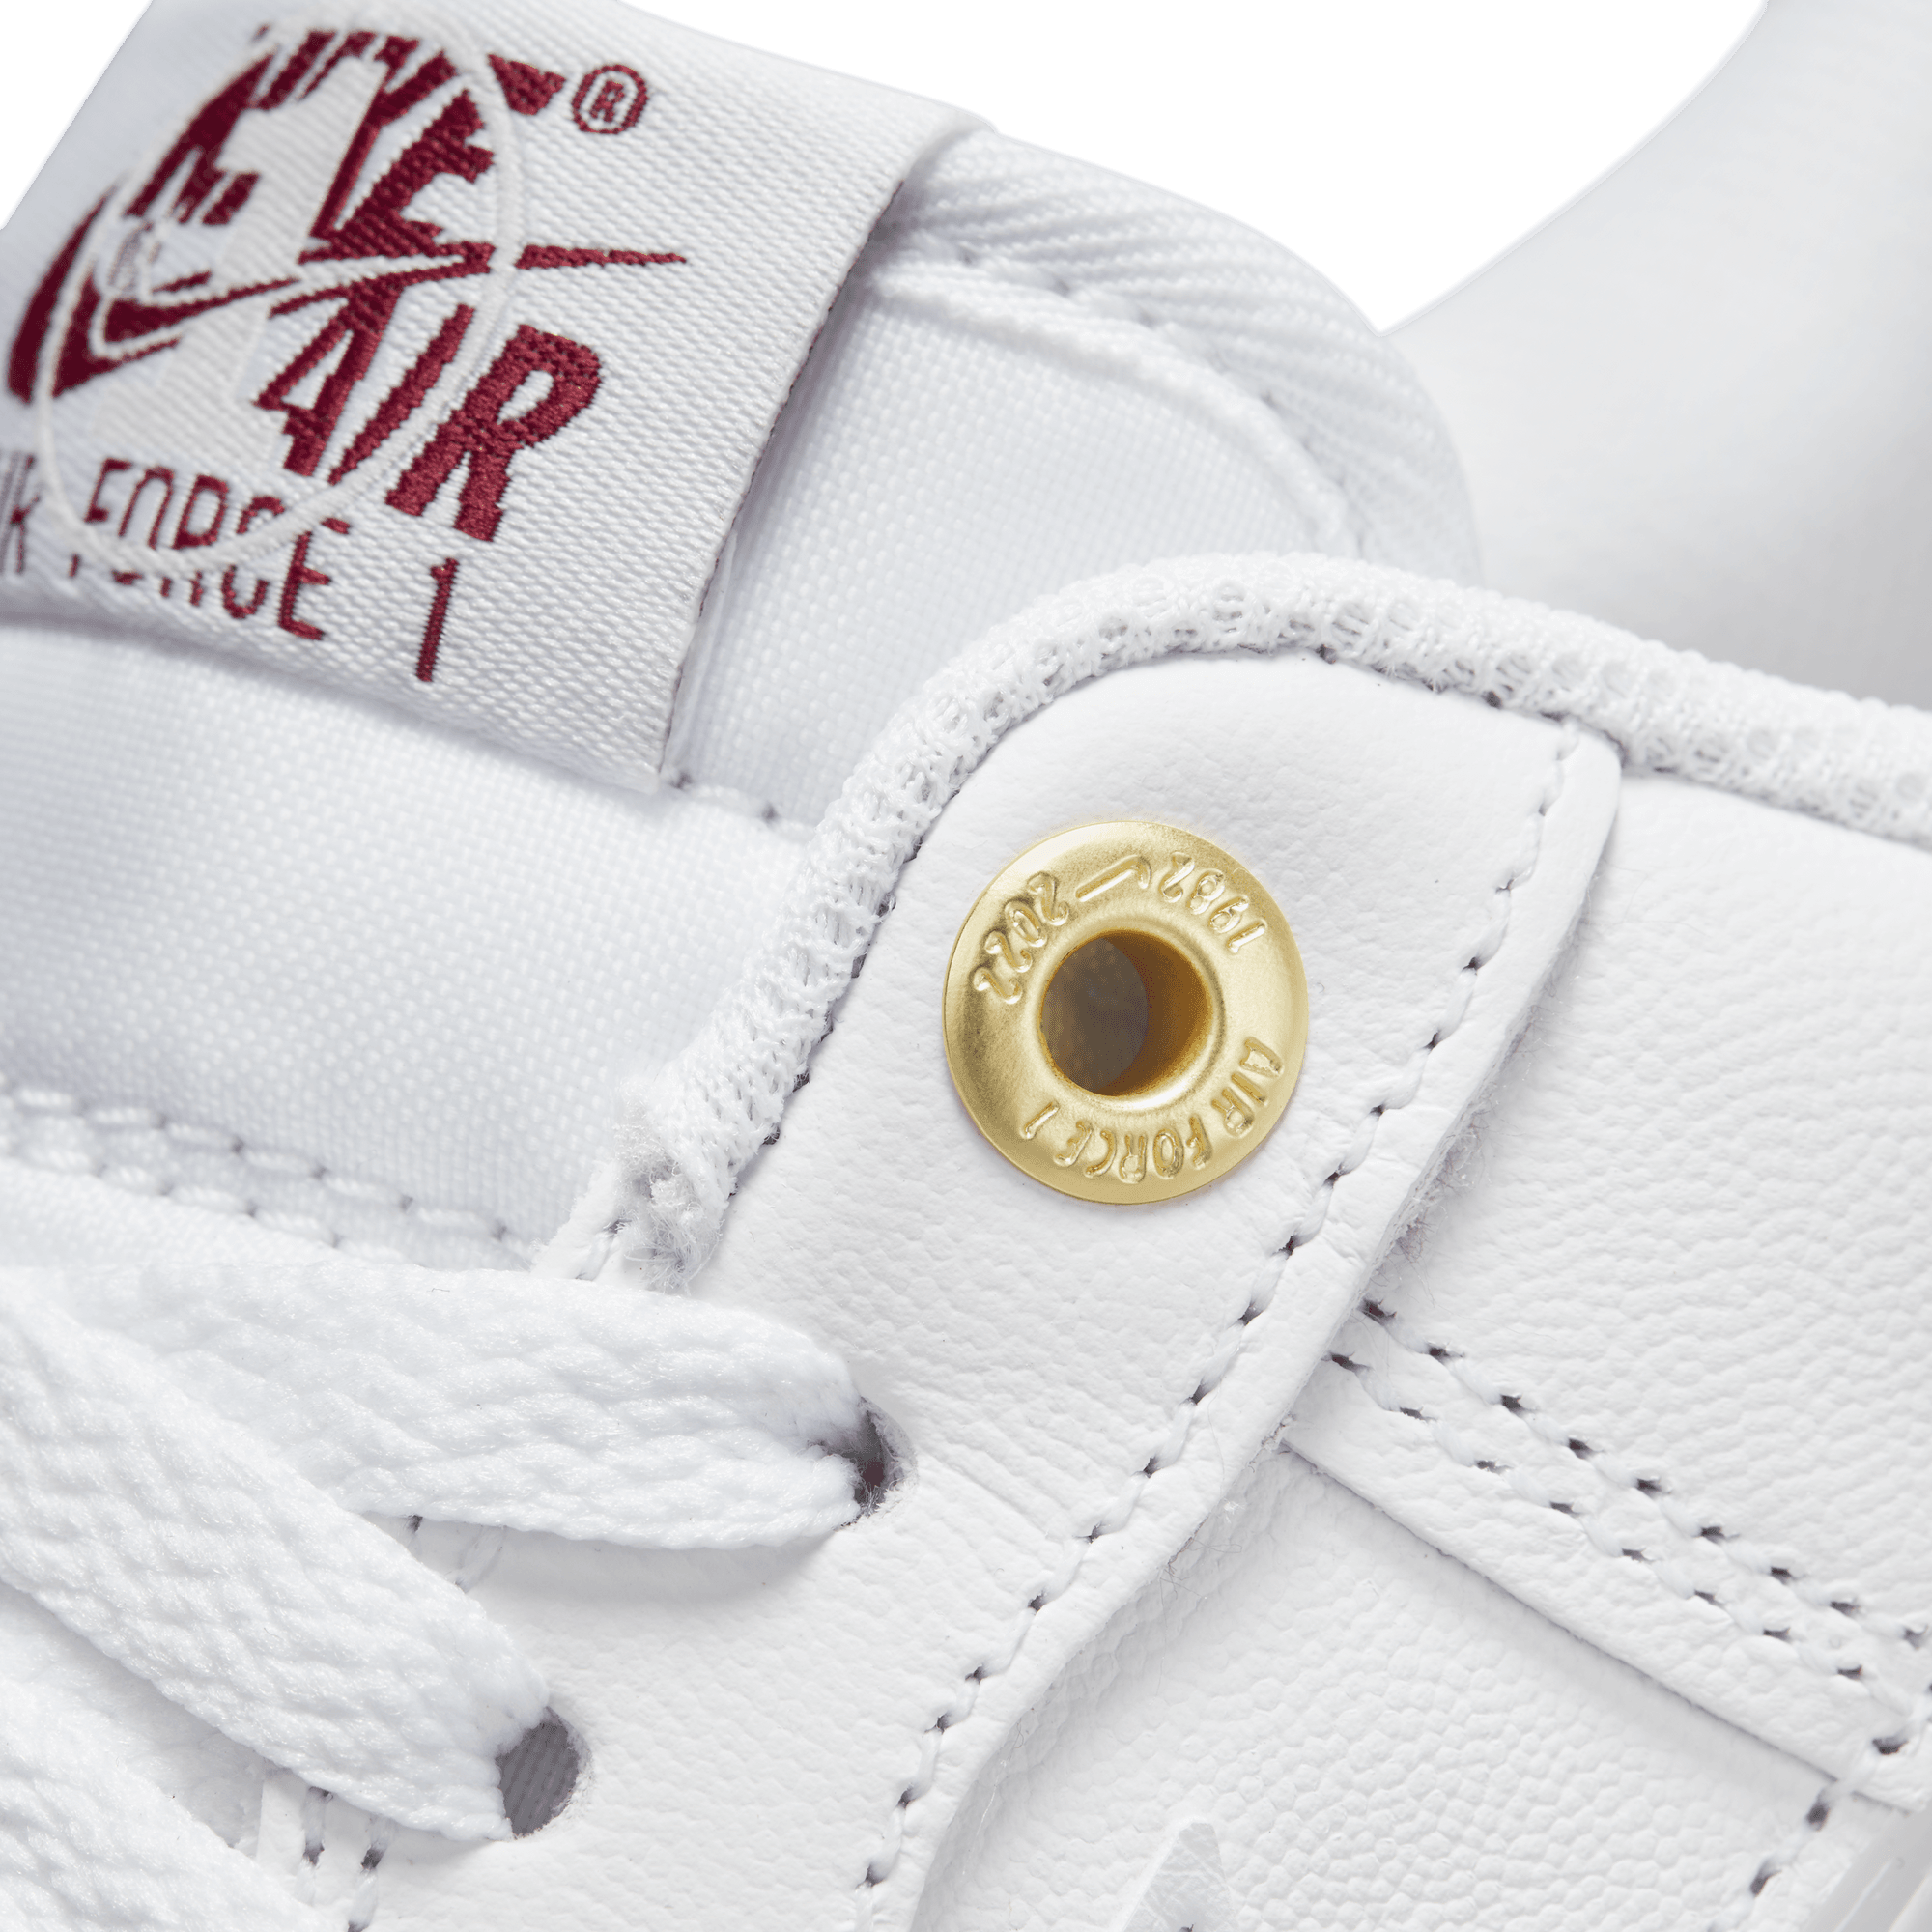 Men's Nike Air Force 1 '07 Premium Join Forces in 2023